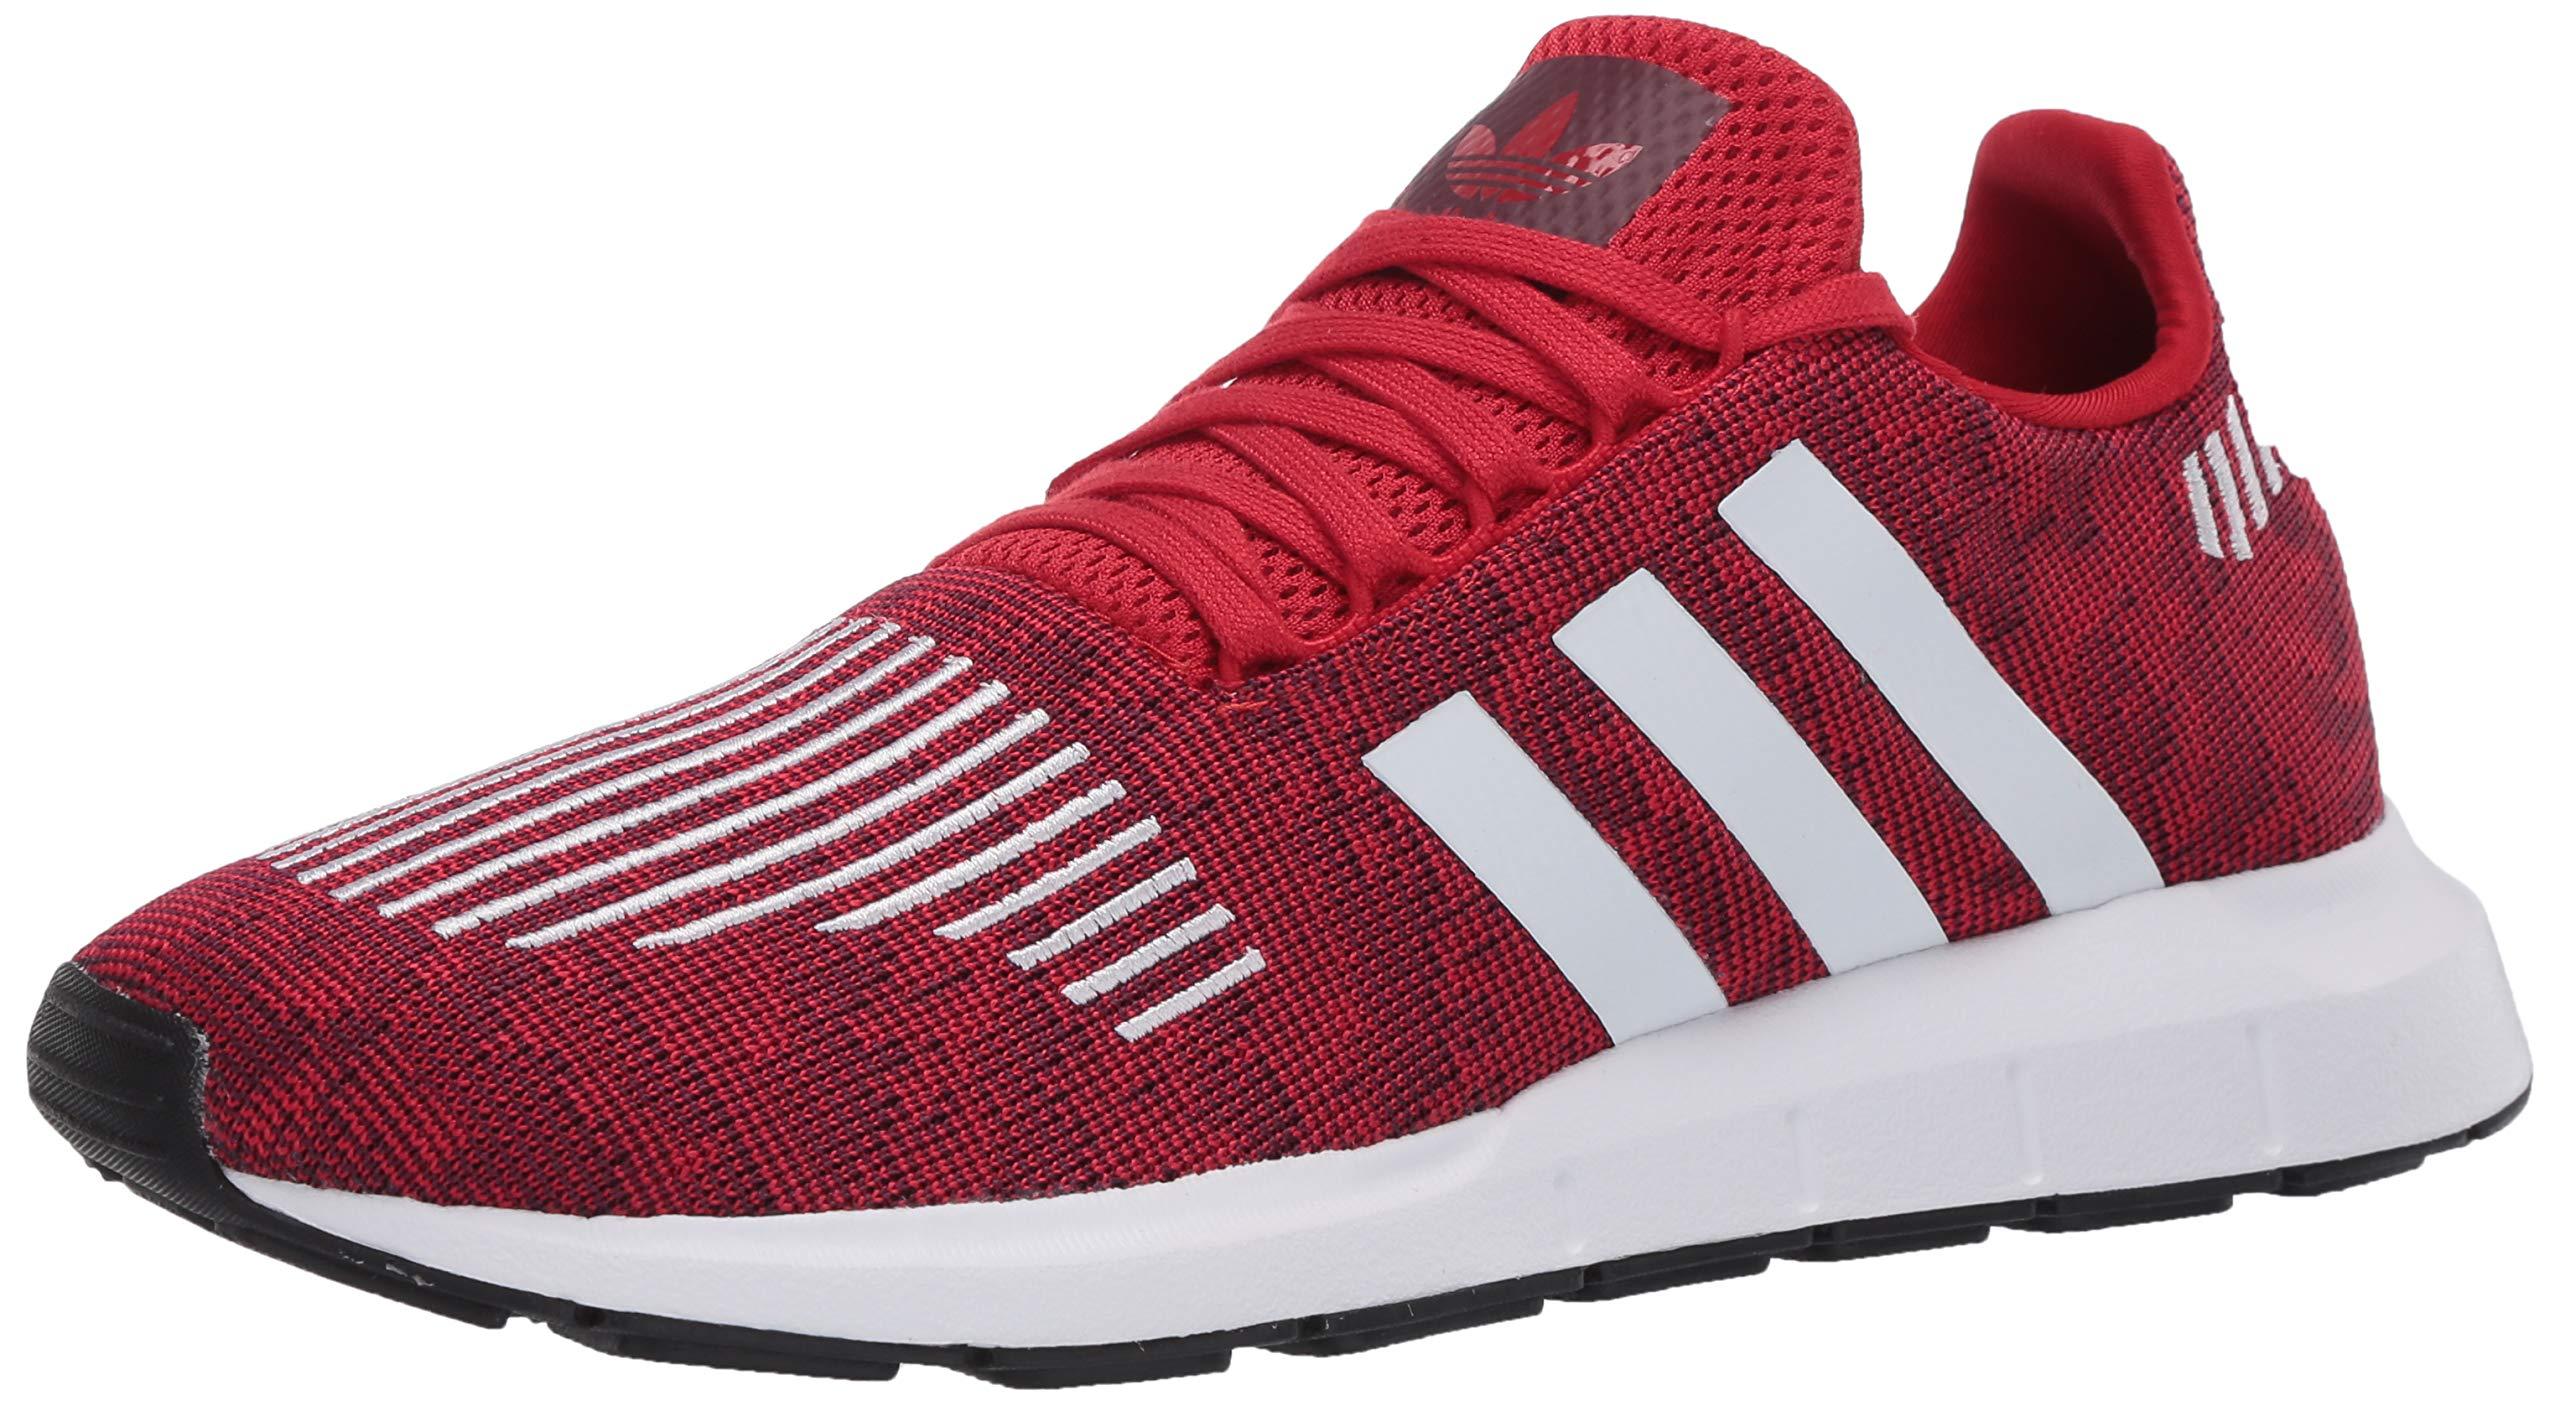 adidas Originals Rubber Swift Run Sneaker in Red for Men - Save 20% - Lyst